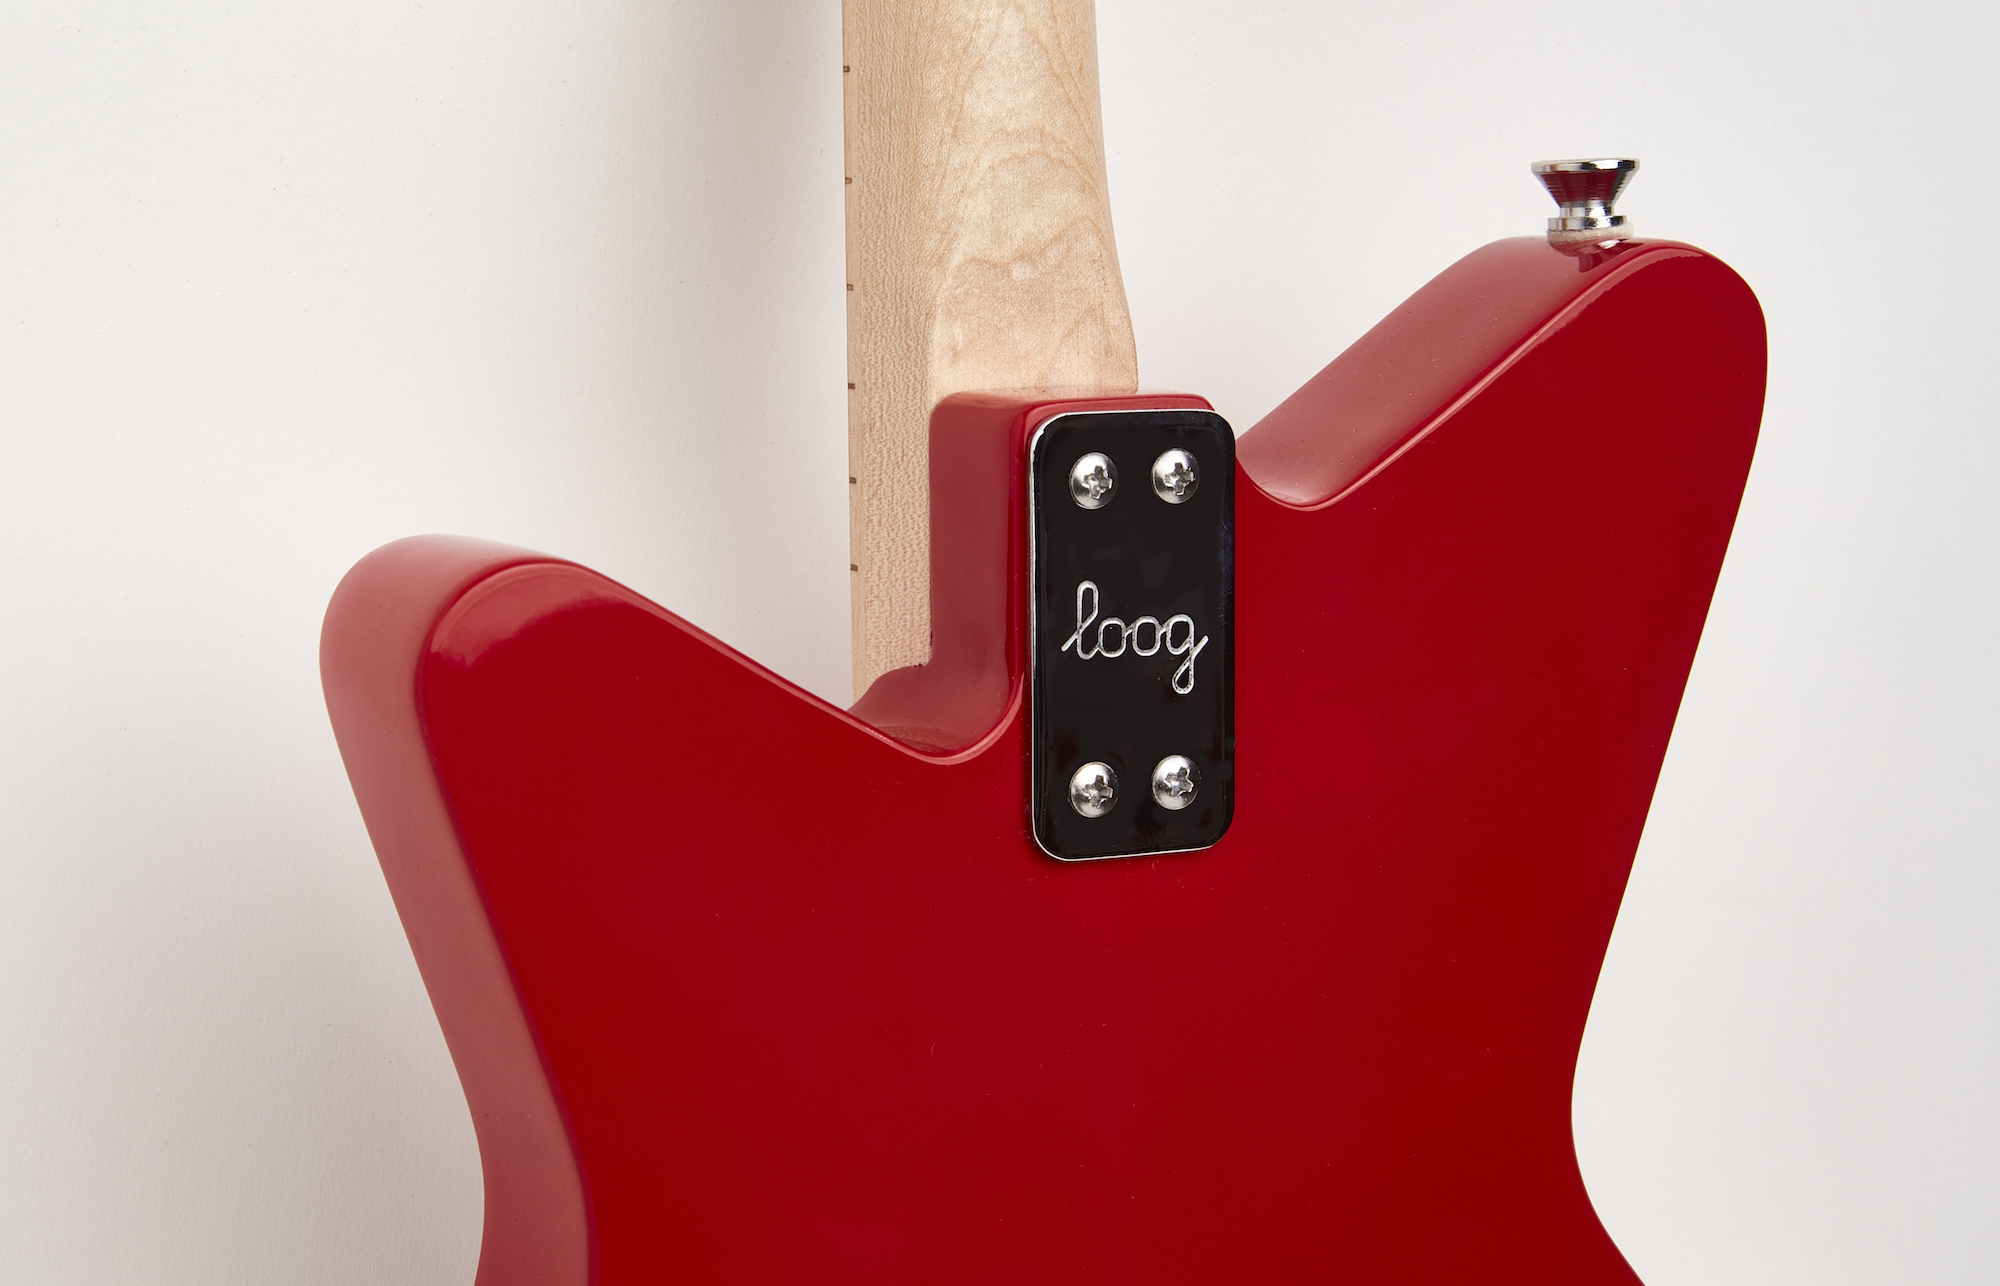 Loog Pro Electric Guitars - Red